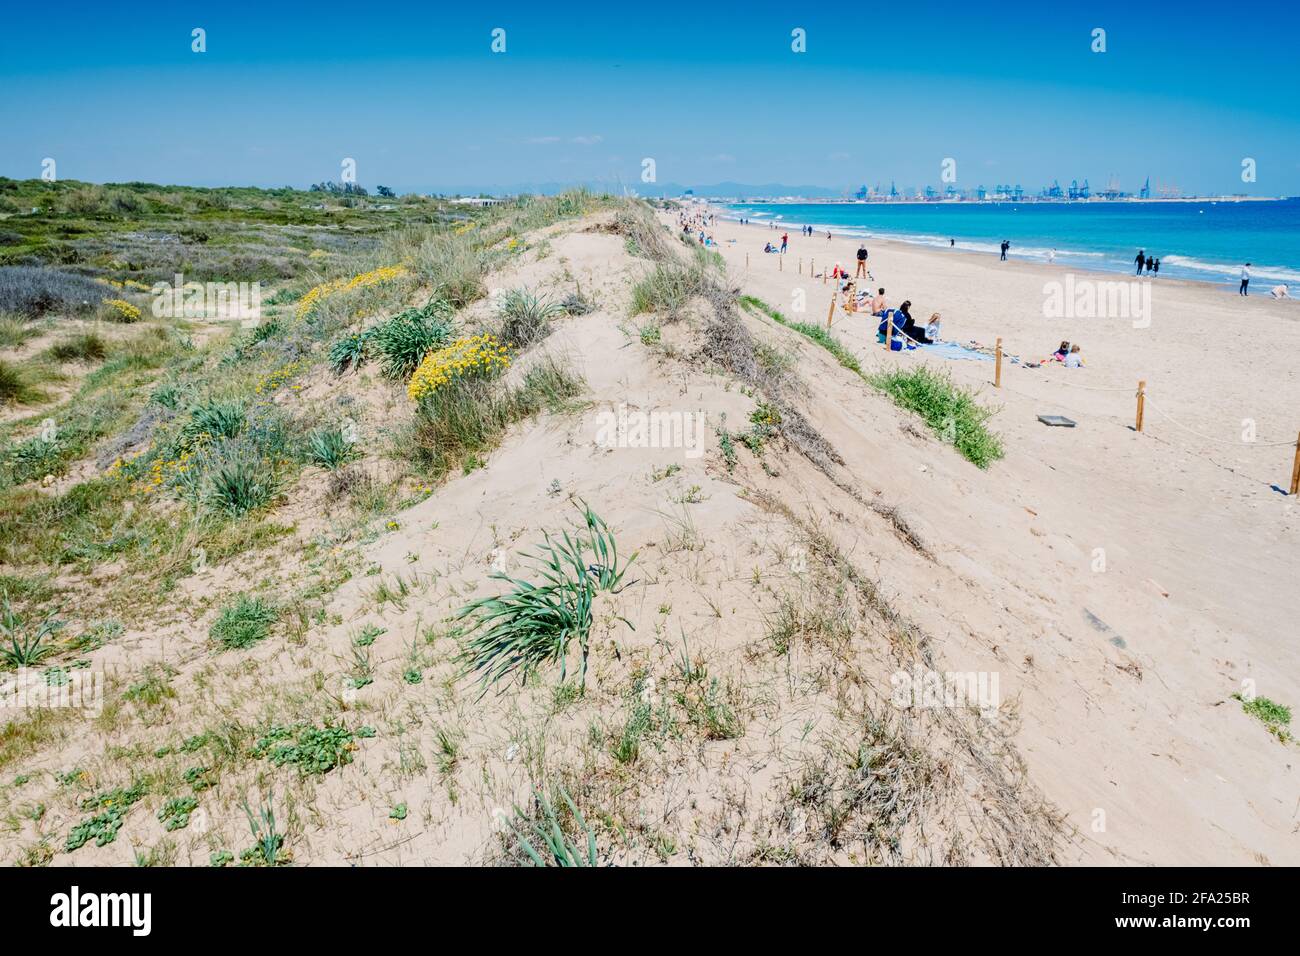 Valencia, Spain - April 21, 2021: Vacationers on a beach, next to the dunes of a protected natural area in El Saler. Stock Photo